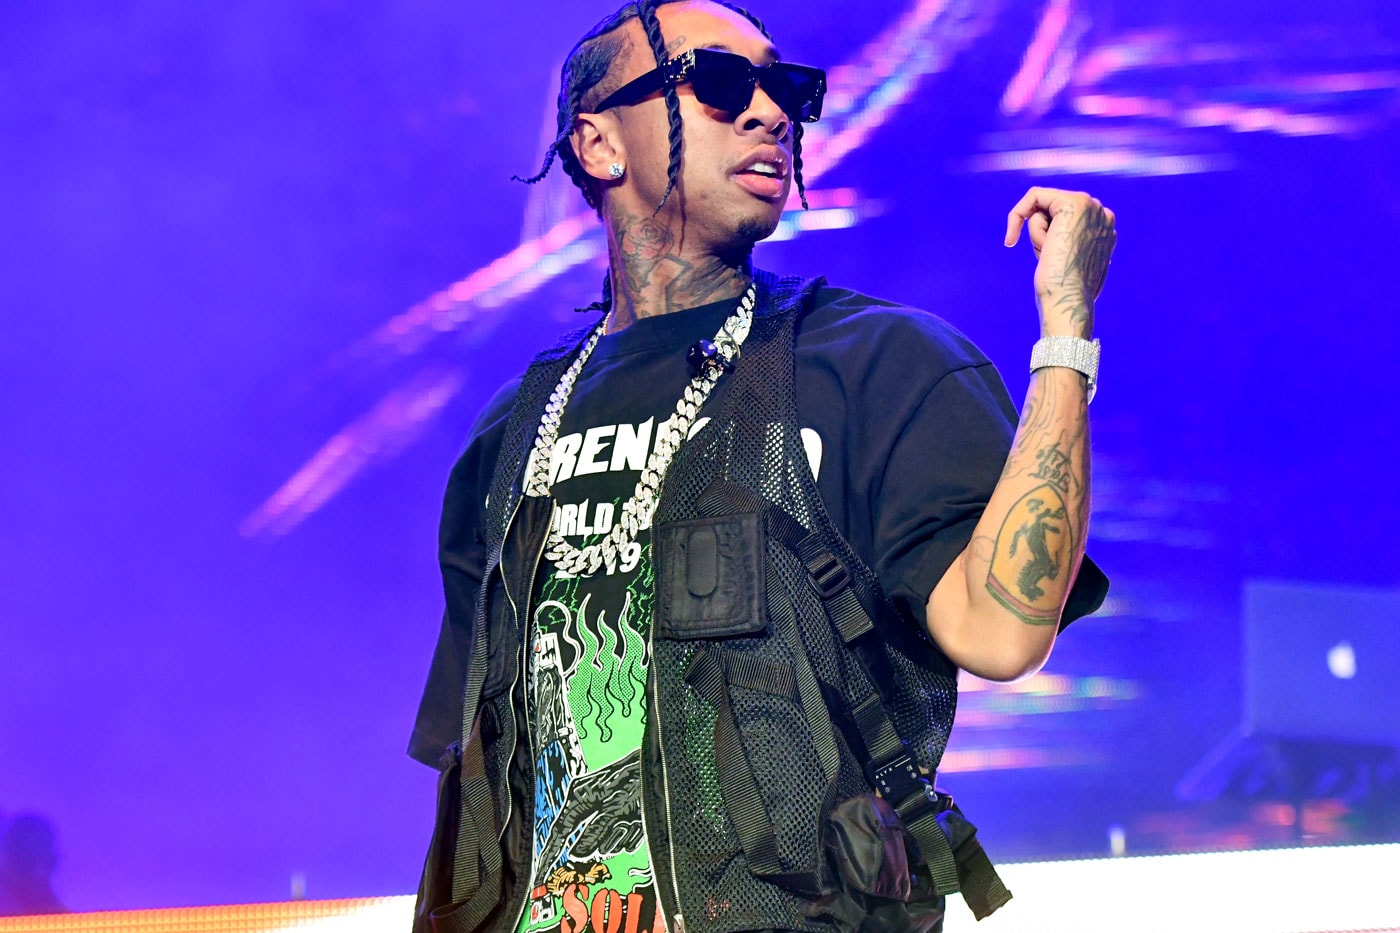 Tyga featuring Lil Wayne – I’m On It (Video & Song)